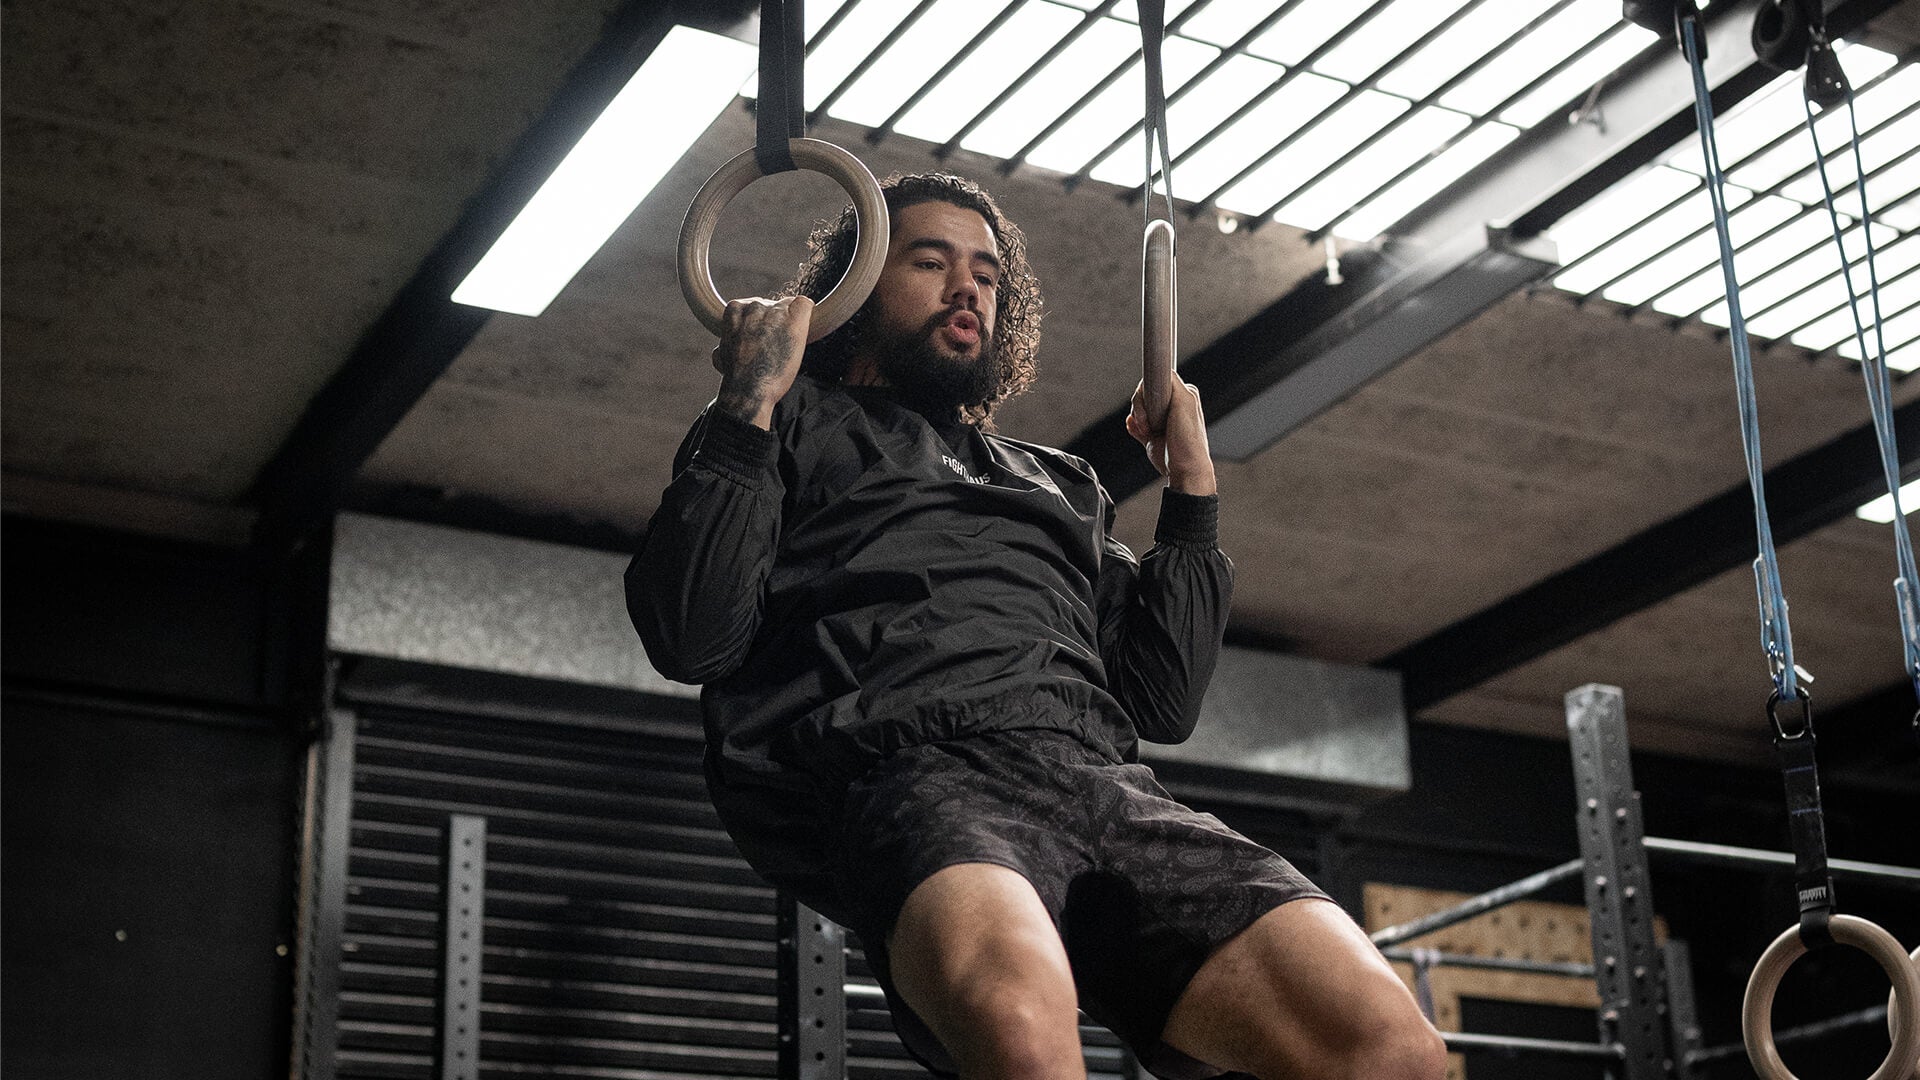 Fighthaus Shop The Best Sauna Suits for Weight Loss, MMA and Boxing